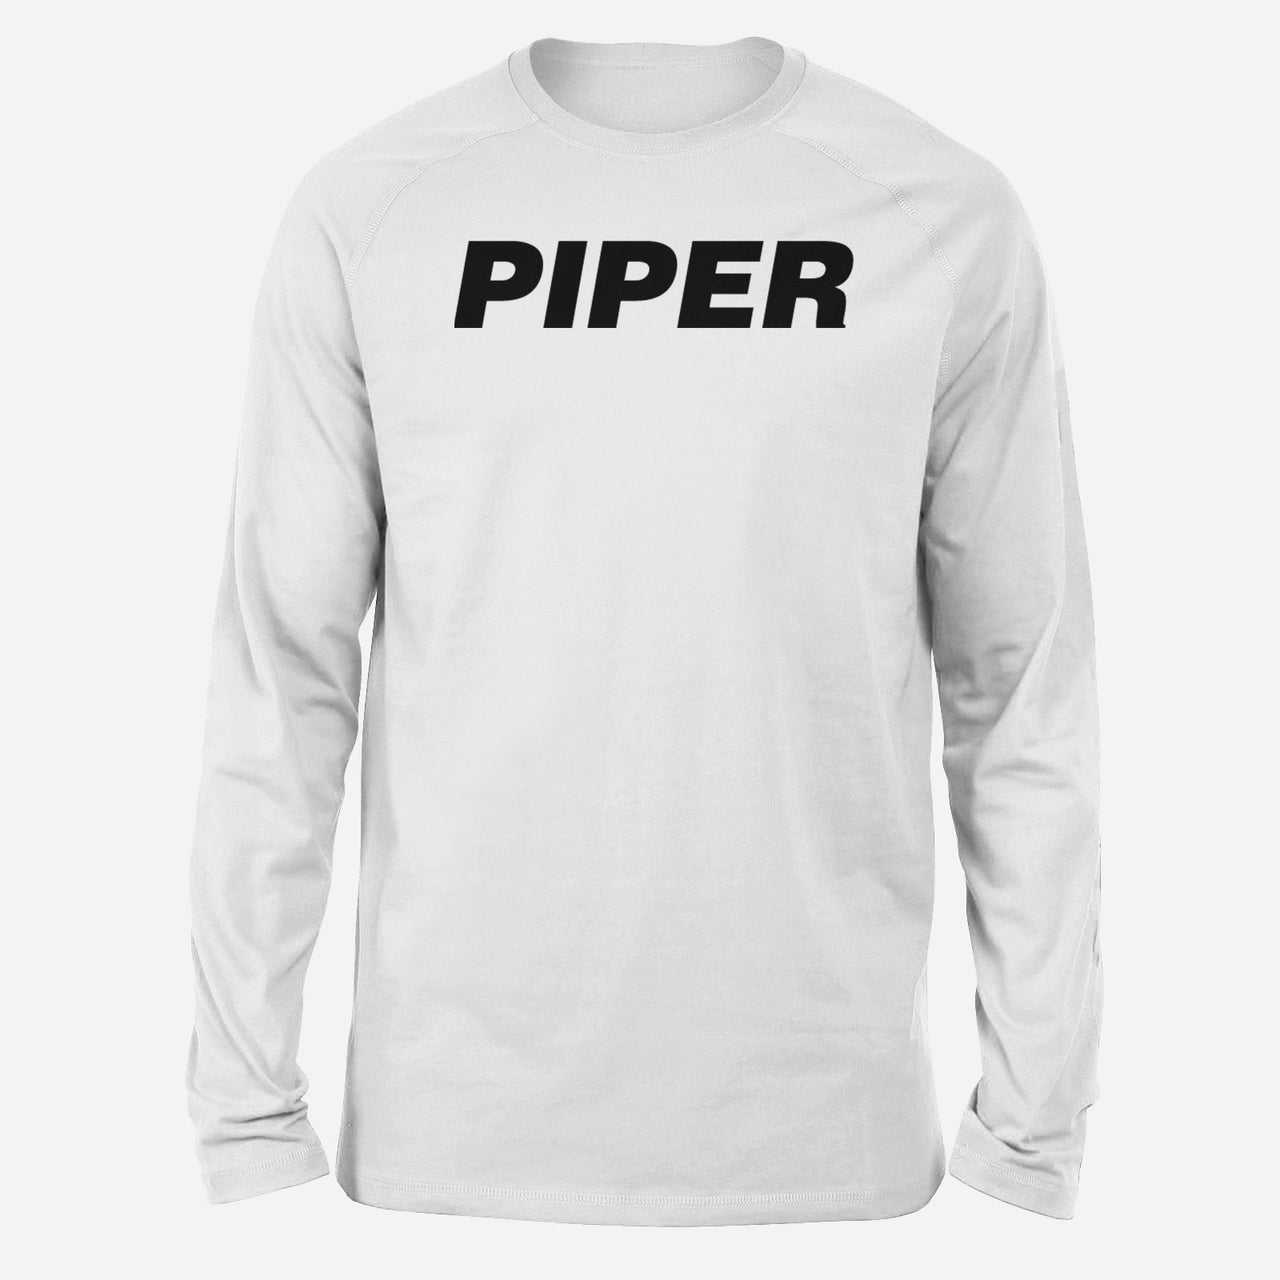 Piper & Text Designed Long-Sleeve T-Shirts